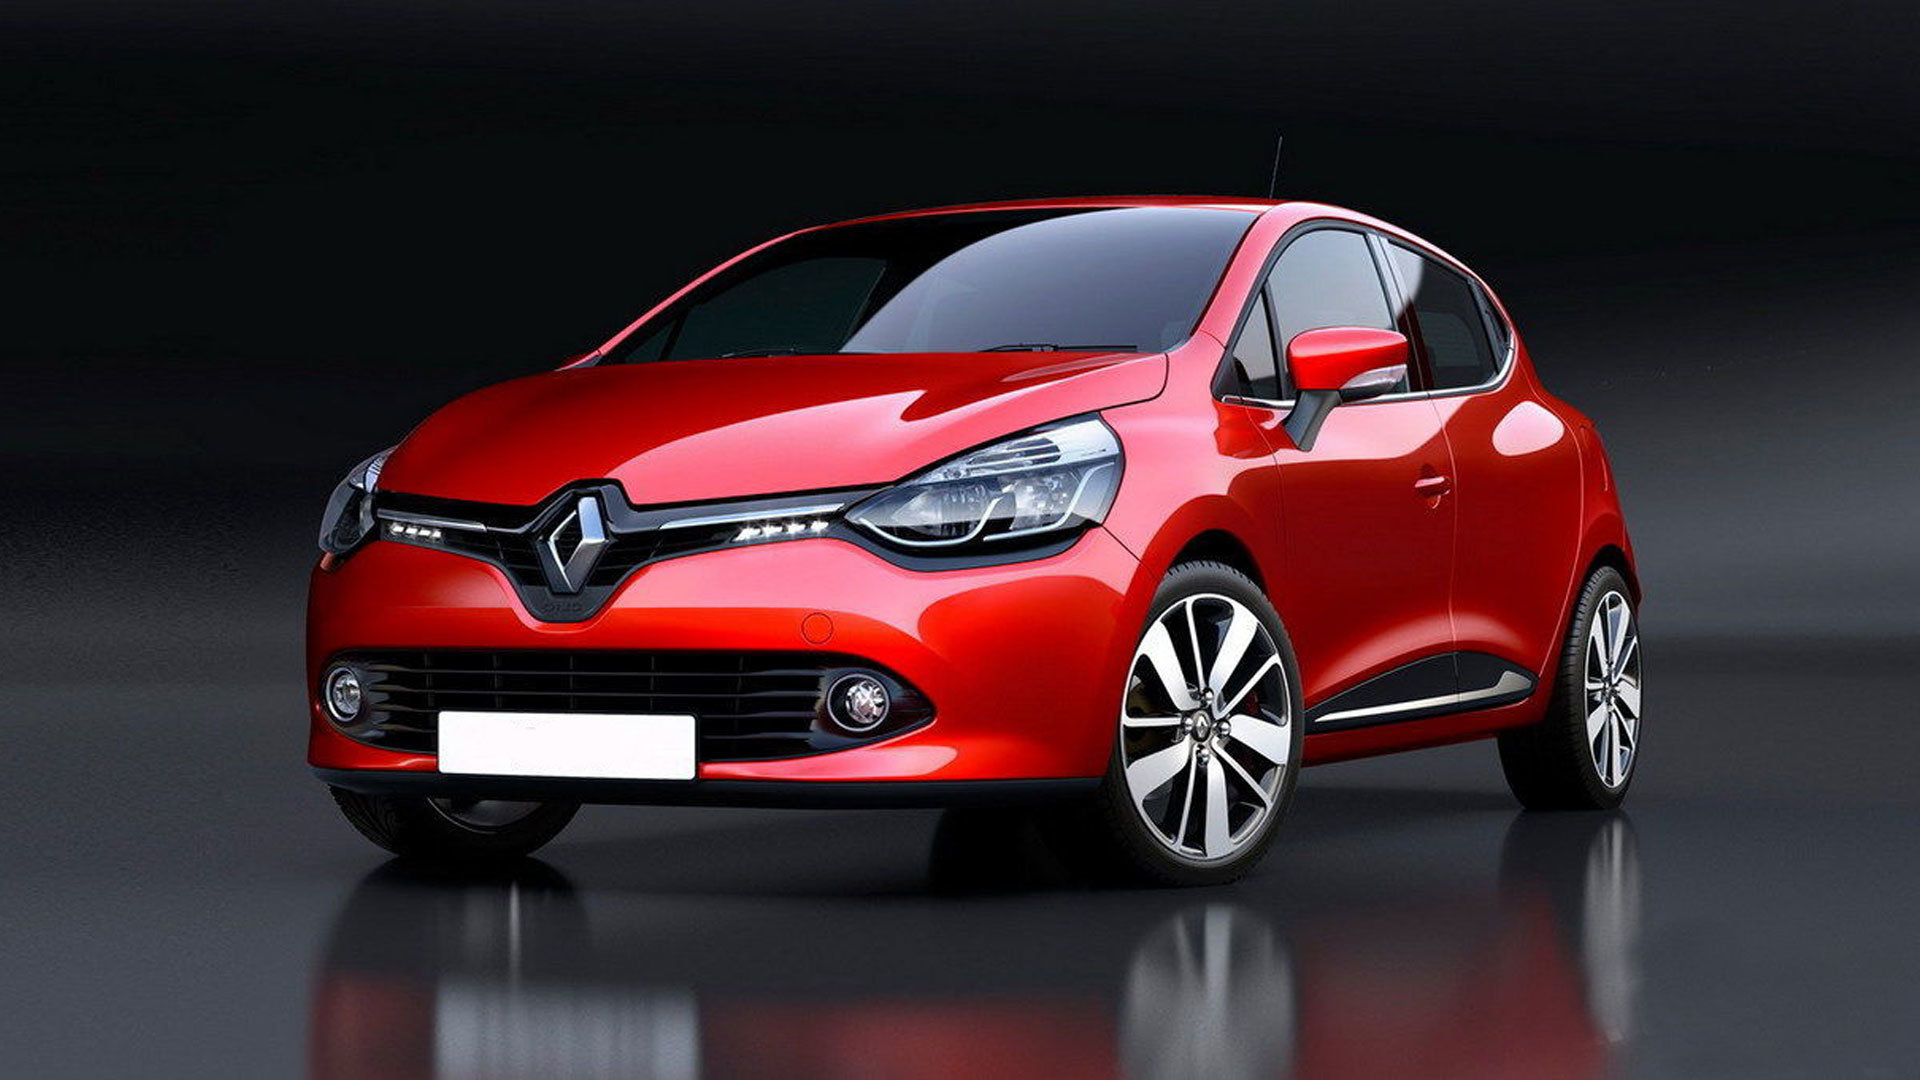 Best Renault Clio wallpaper ID:250160 for High Resolution full hd computer